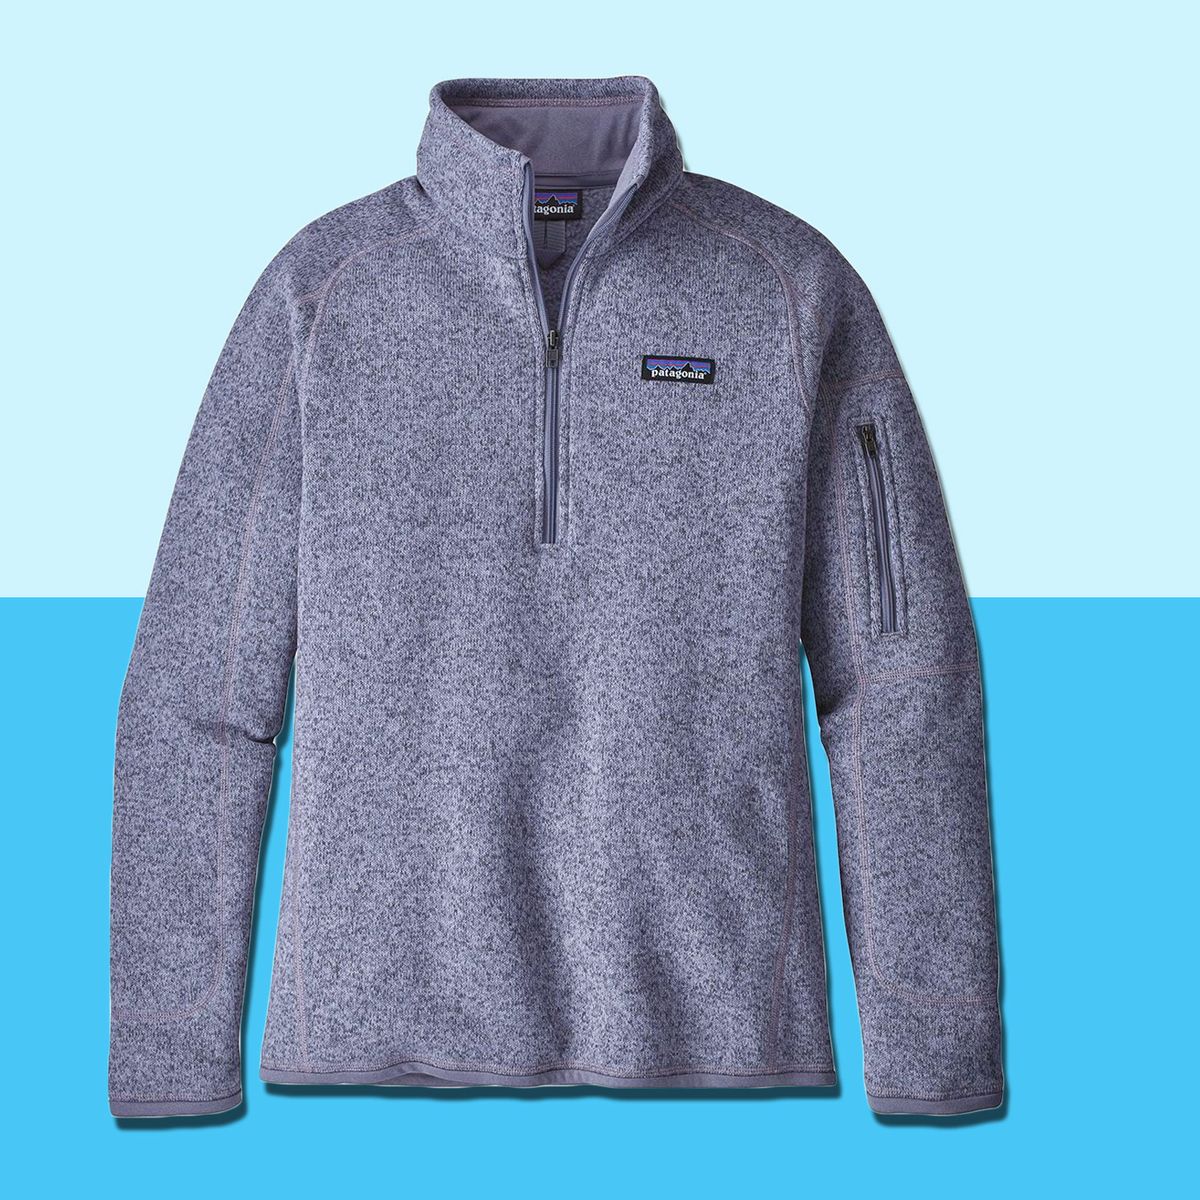 Simuler direktør mave Patagonia Better Sweater on Sale at Backcountry 2019 | The Strategist